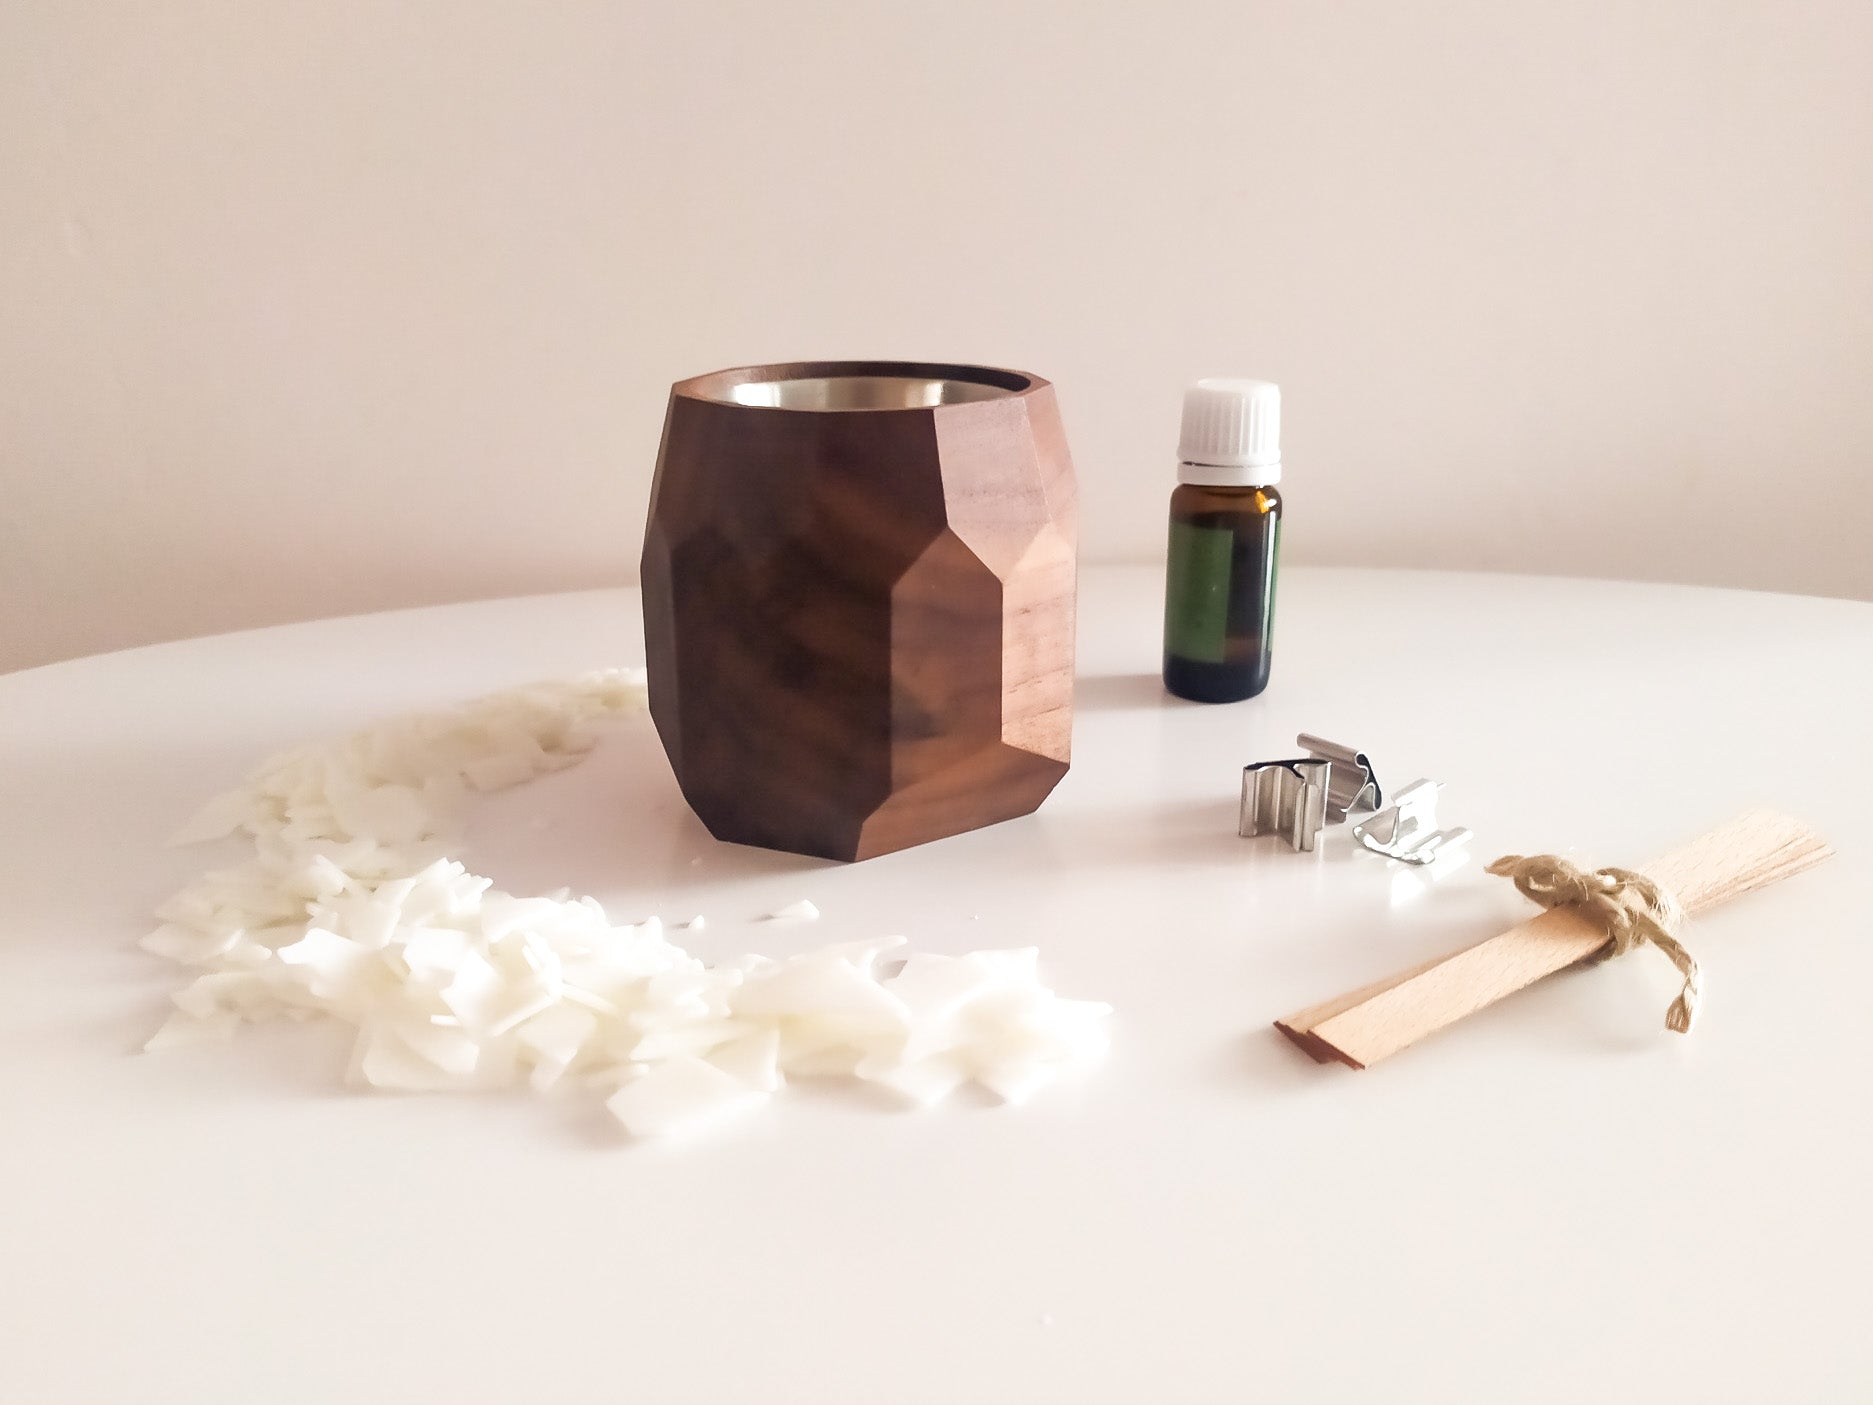 DIY Soy Candle In a Wooden Pot